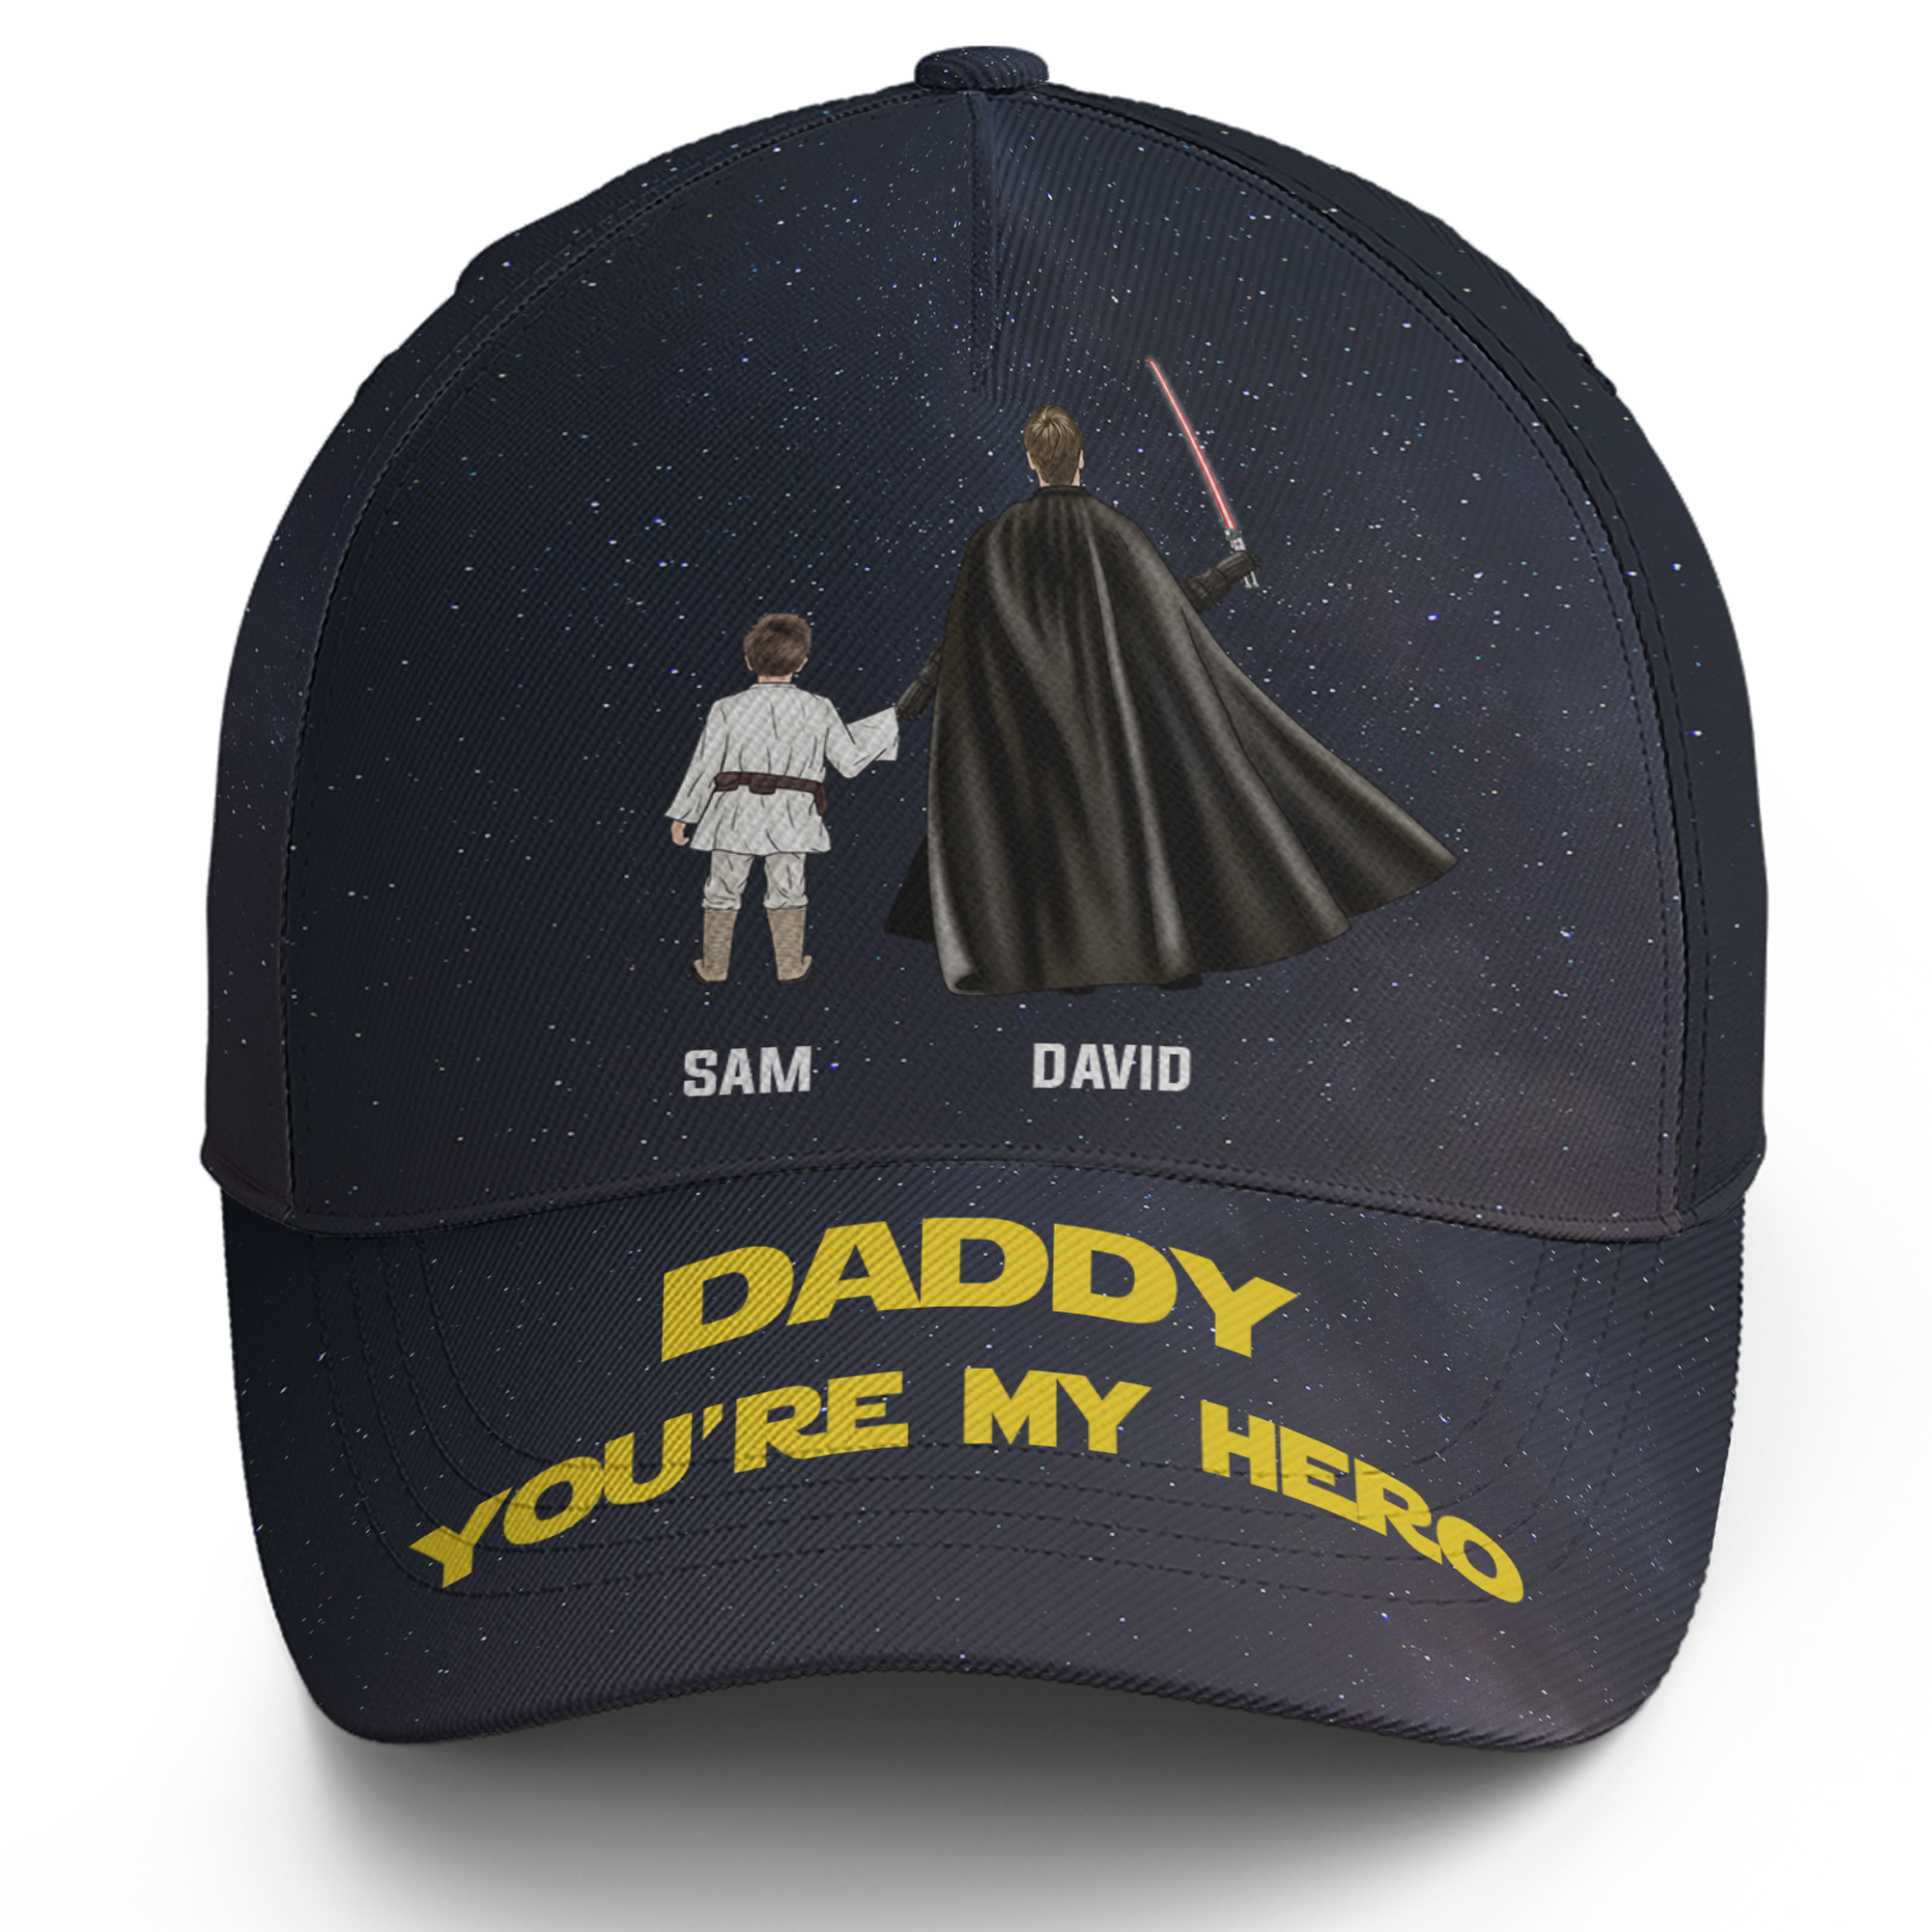 Daddy You're My Hero - Personalized Classic Cap - Gift Hat For Father, Dad, Daddy, Father's Day, Grandpa, Step Dad, Bonus Dad